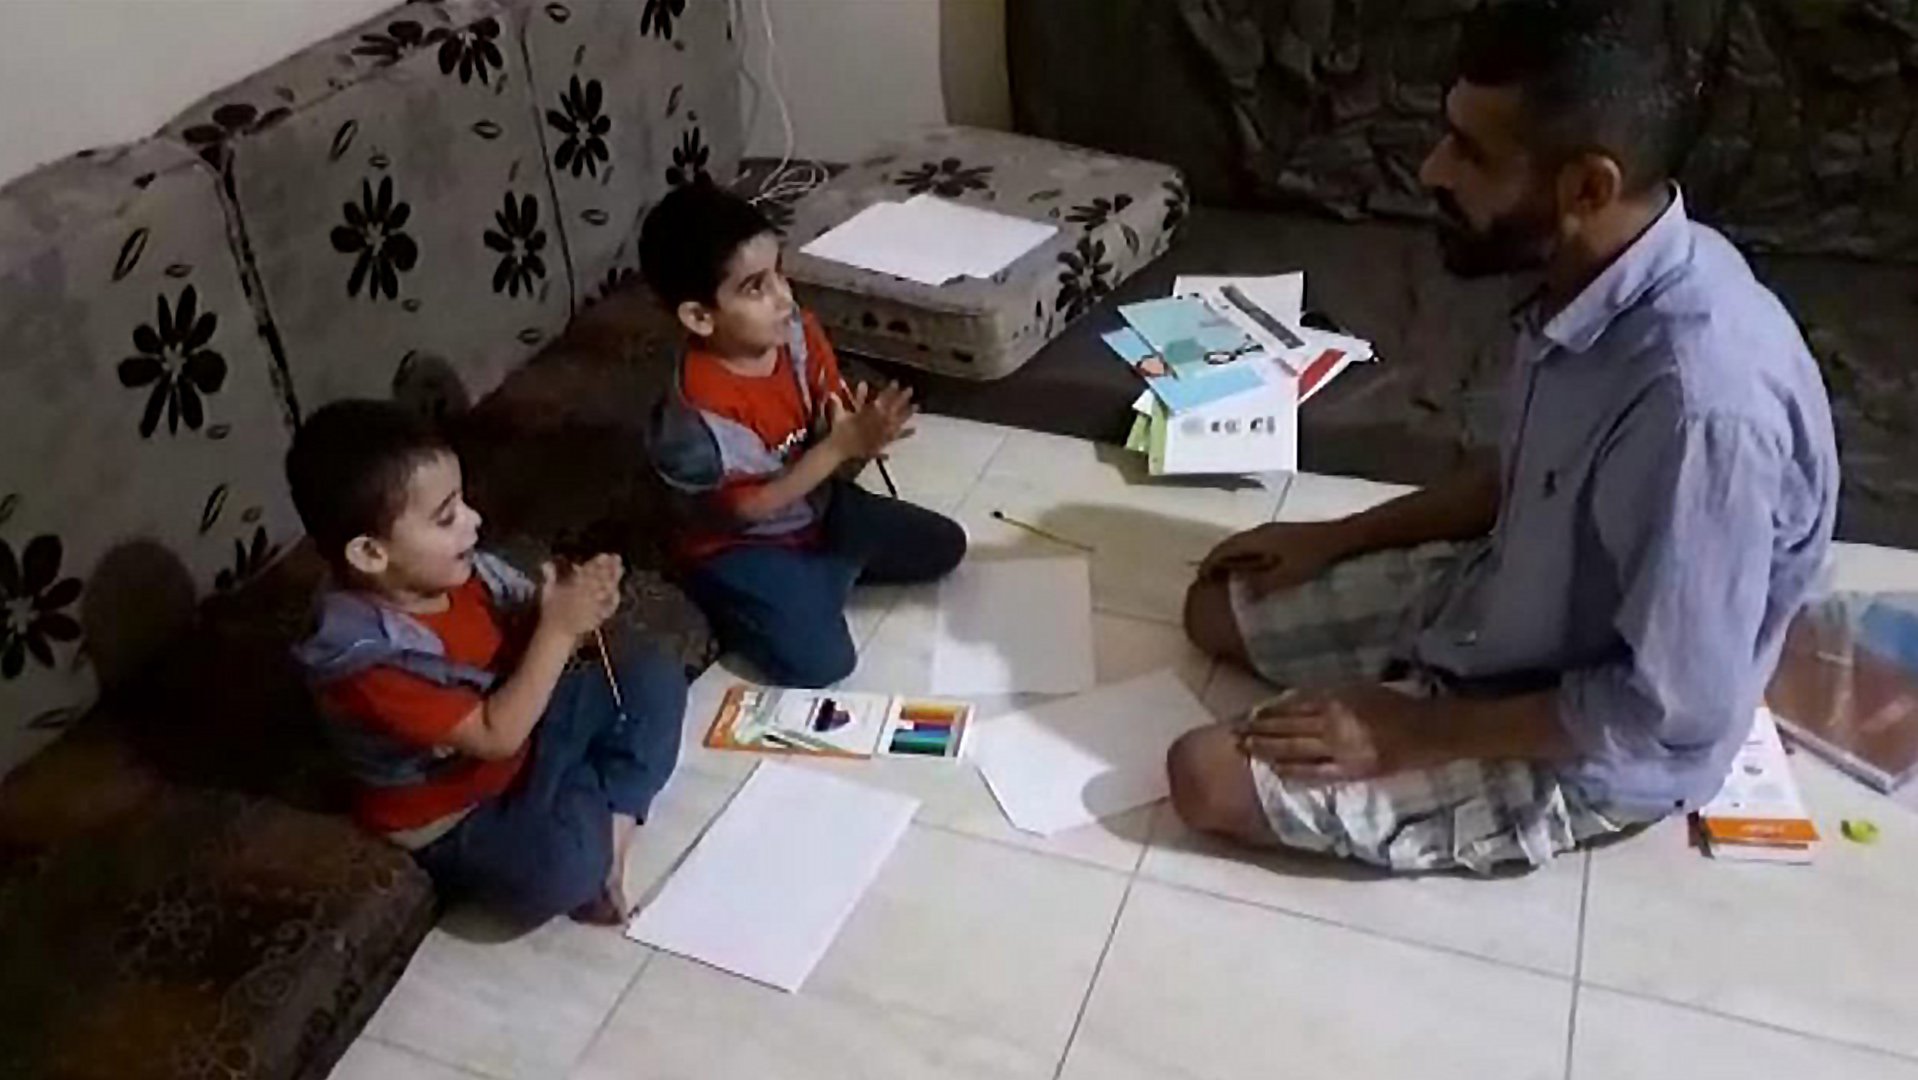 Education at home for Nader's sons in a refugeecamp in Lebanon War Child